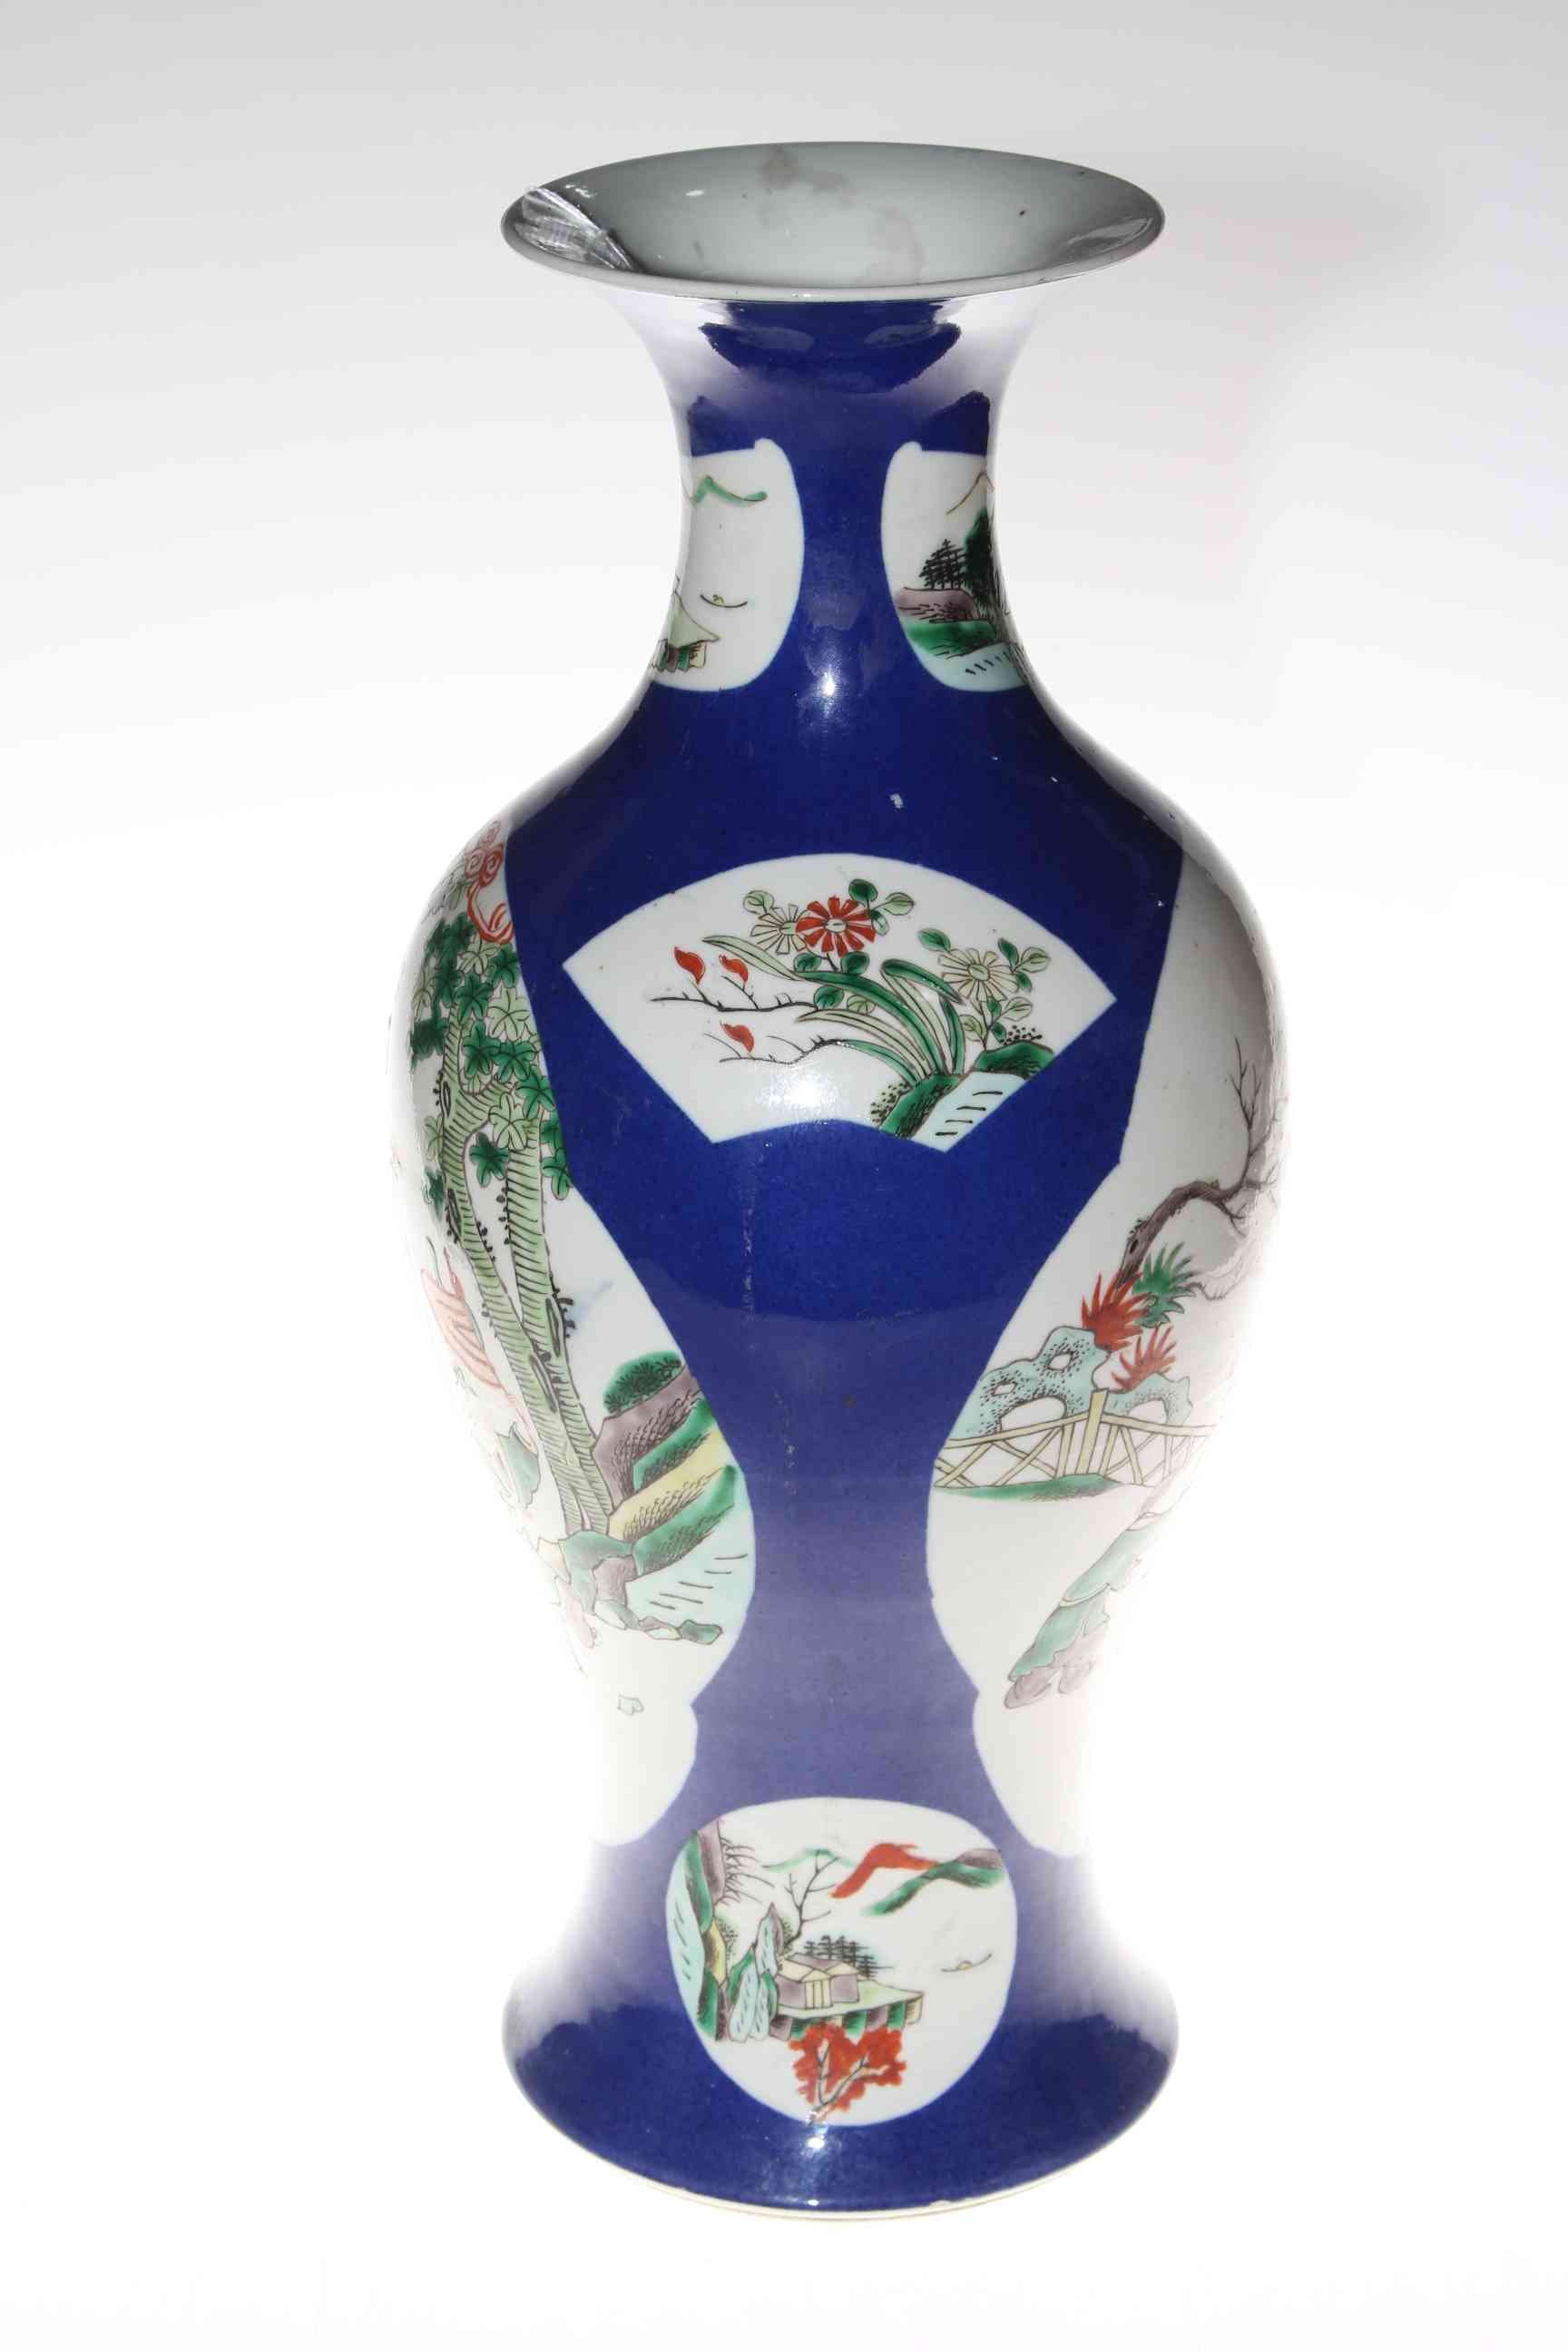 Chinese 19th Century famille verte powder blue vase, with figures, flowers and landscape decoration, - Image 2 of 4